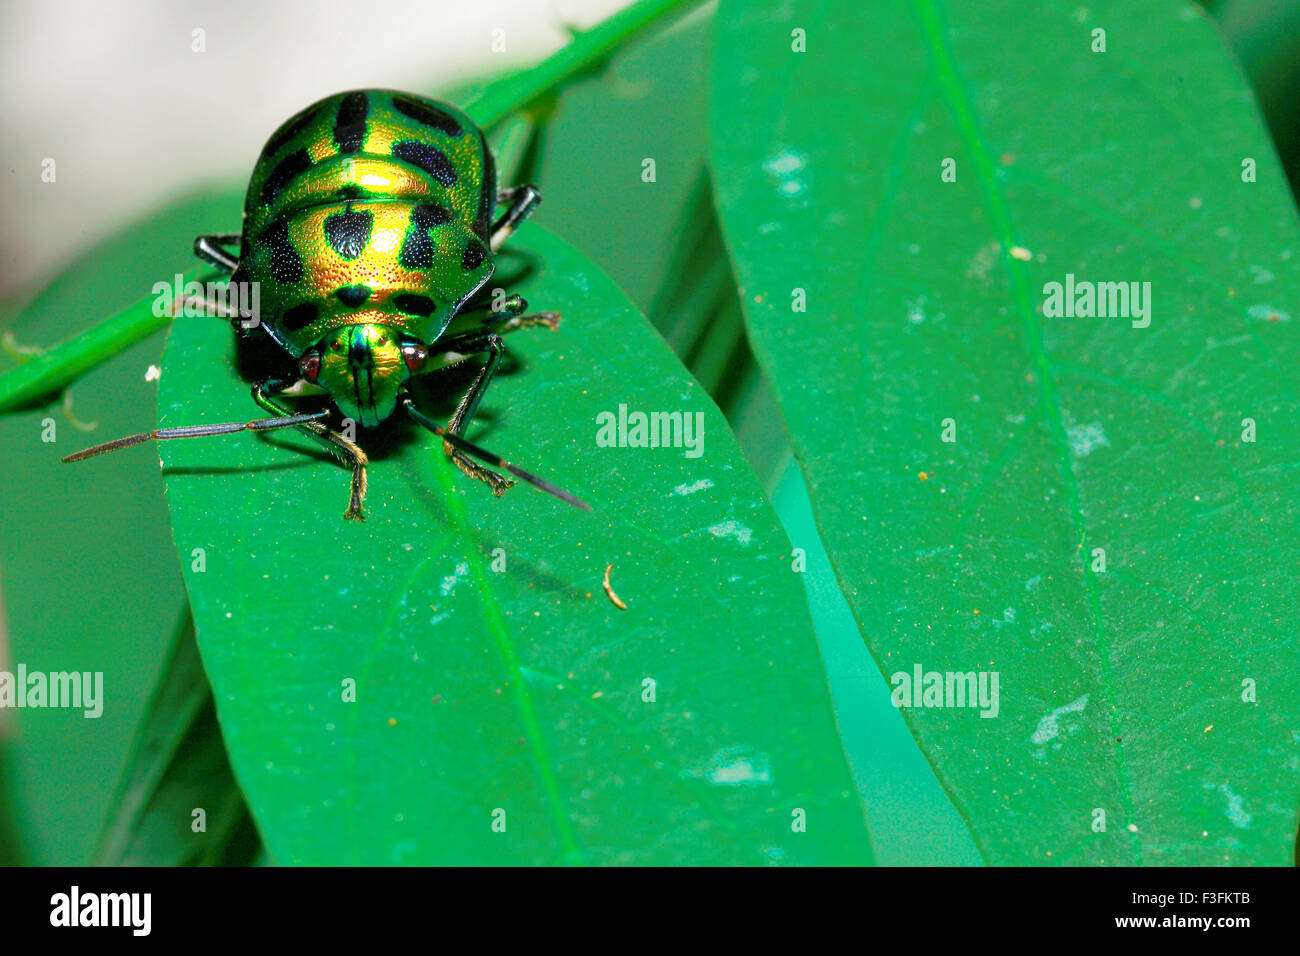 Insect ; gold bug with black polka dots on green leaf ; Calicut ; Kerala ; India Stock Photo